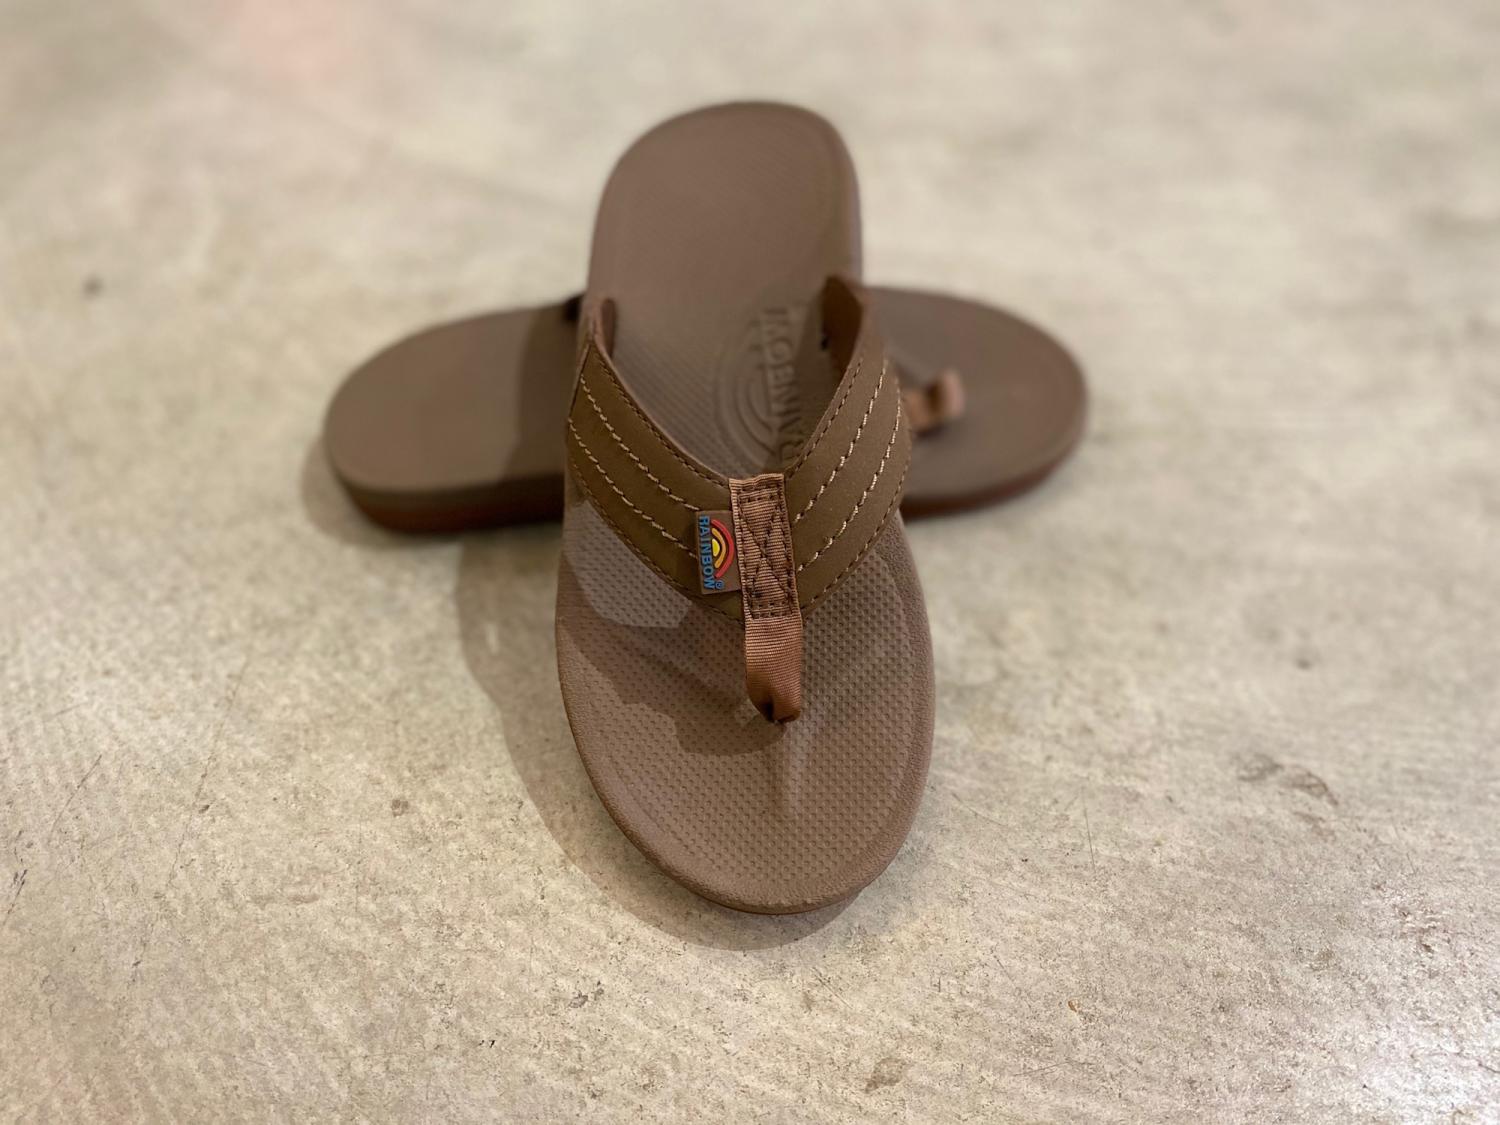 RAINBOW SANDALS KID'S CAPES Sierra Brown Molded Rubber Sandal with a Suede Strap